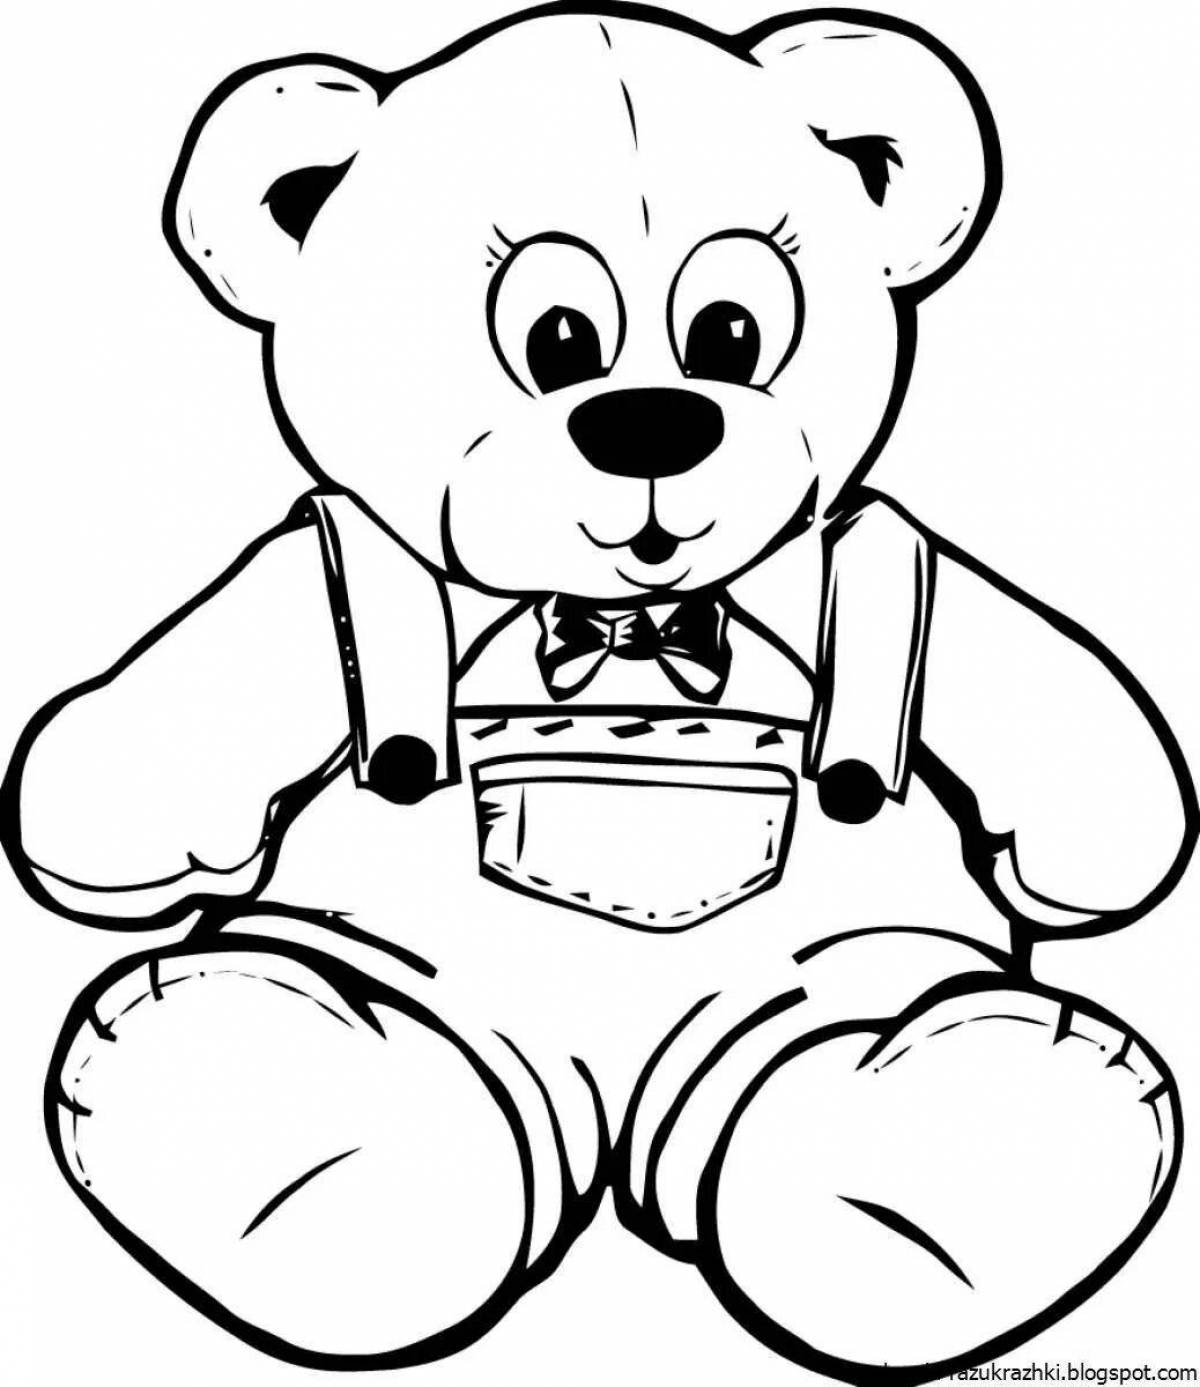 Blessed teddy bear coloring page